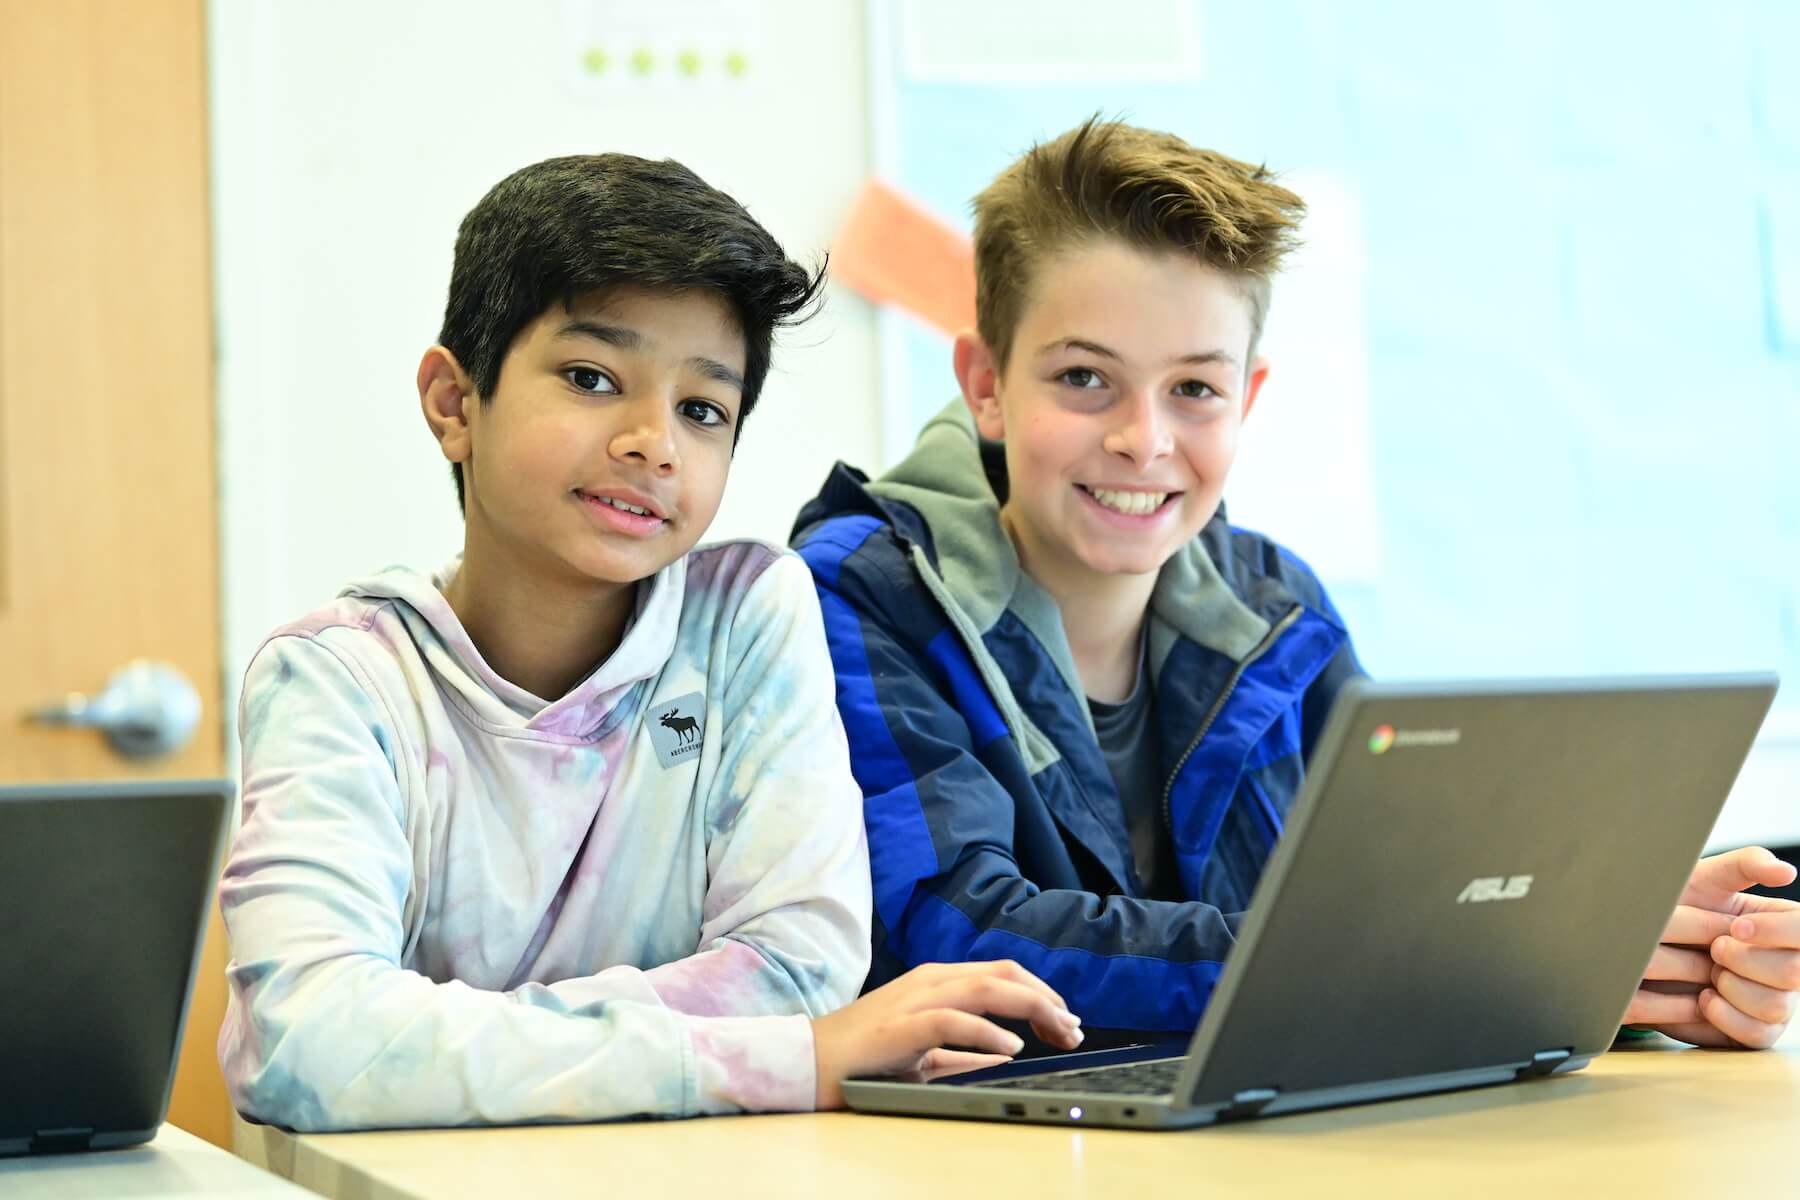 Ethical Culture Fieldston School Middle School students working together on computer pause to smile for the camera